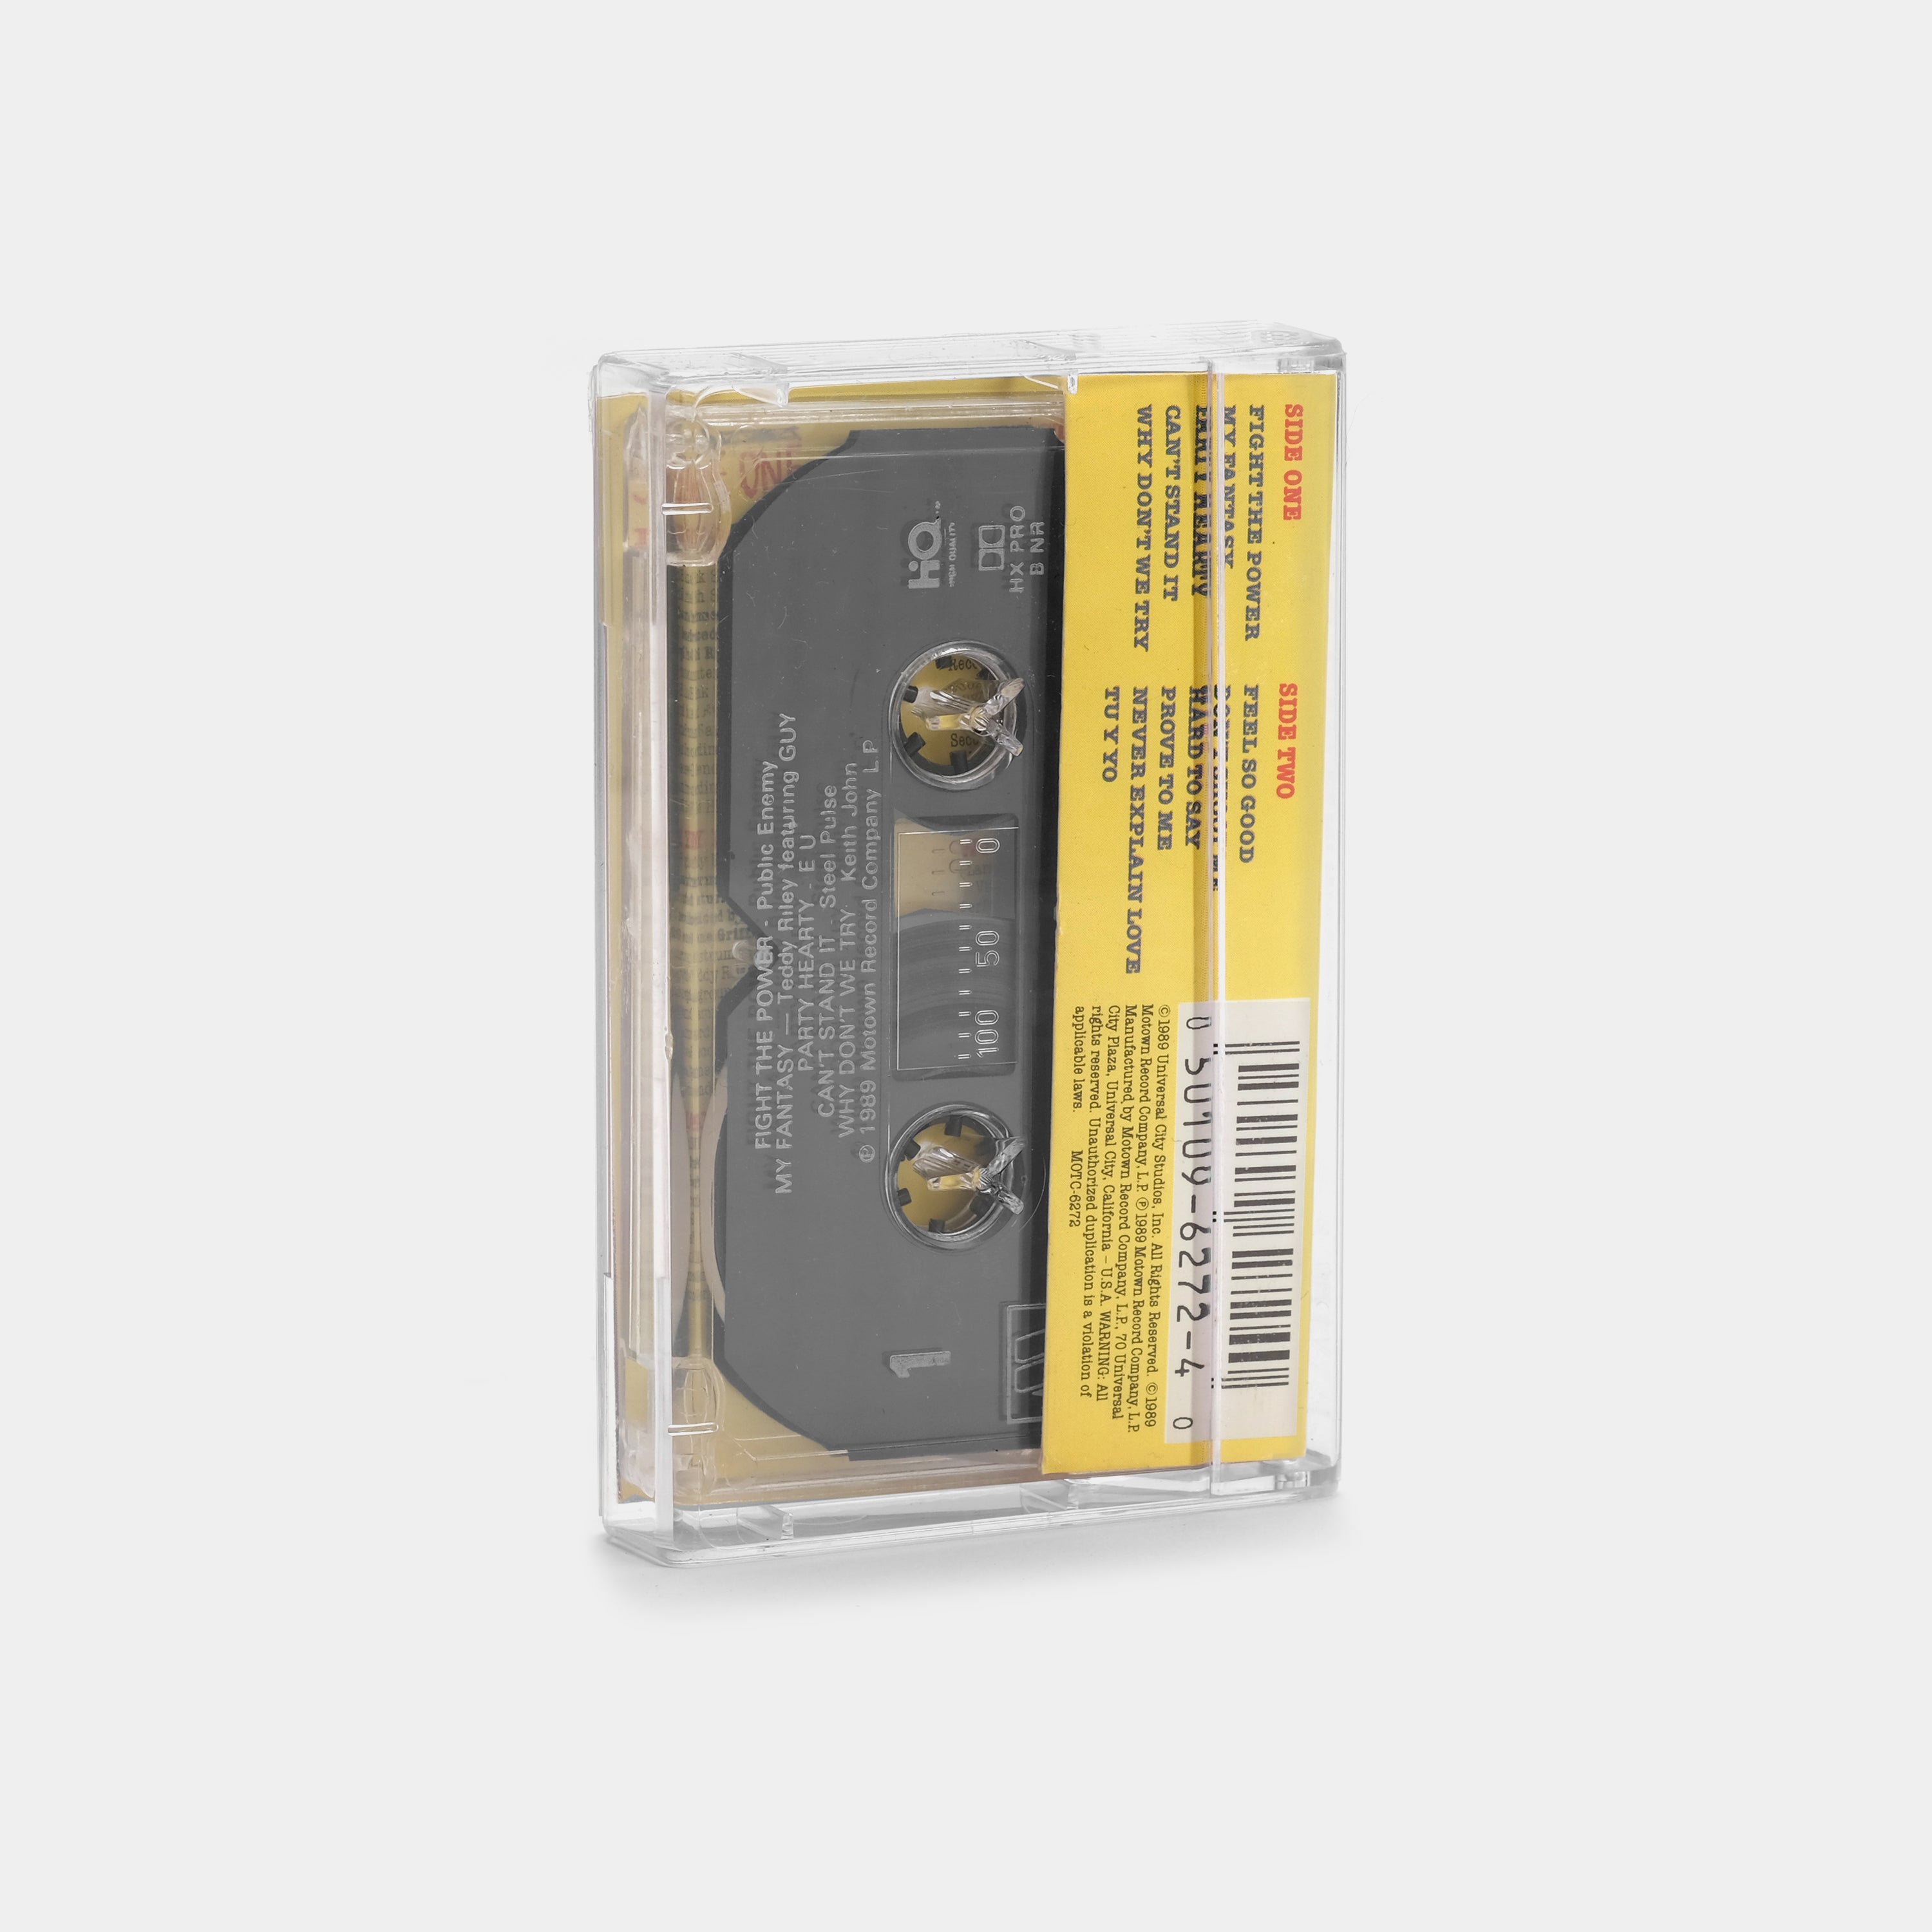 Music From Do The Right Thing Cassette Tape